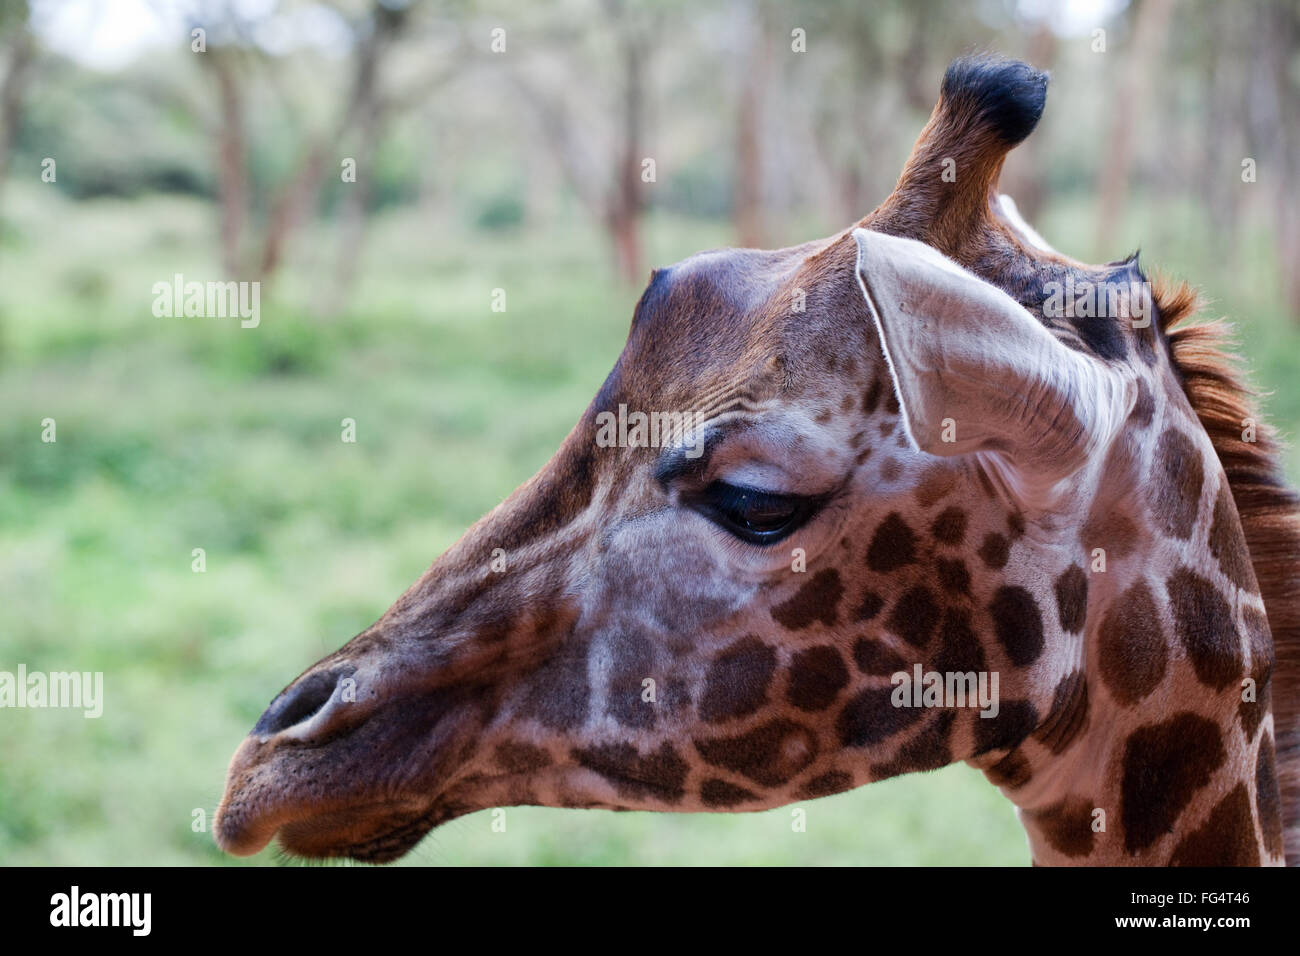 Reticulated Giraffe (Giraffe camelopardalis reticulata). Head facial features, including OSSICONES (rather than horns!) Stock Photo